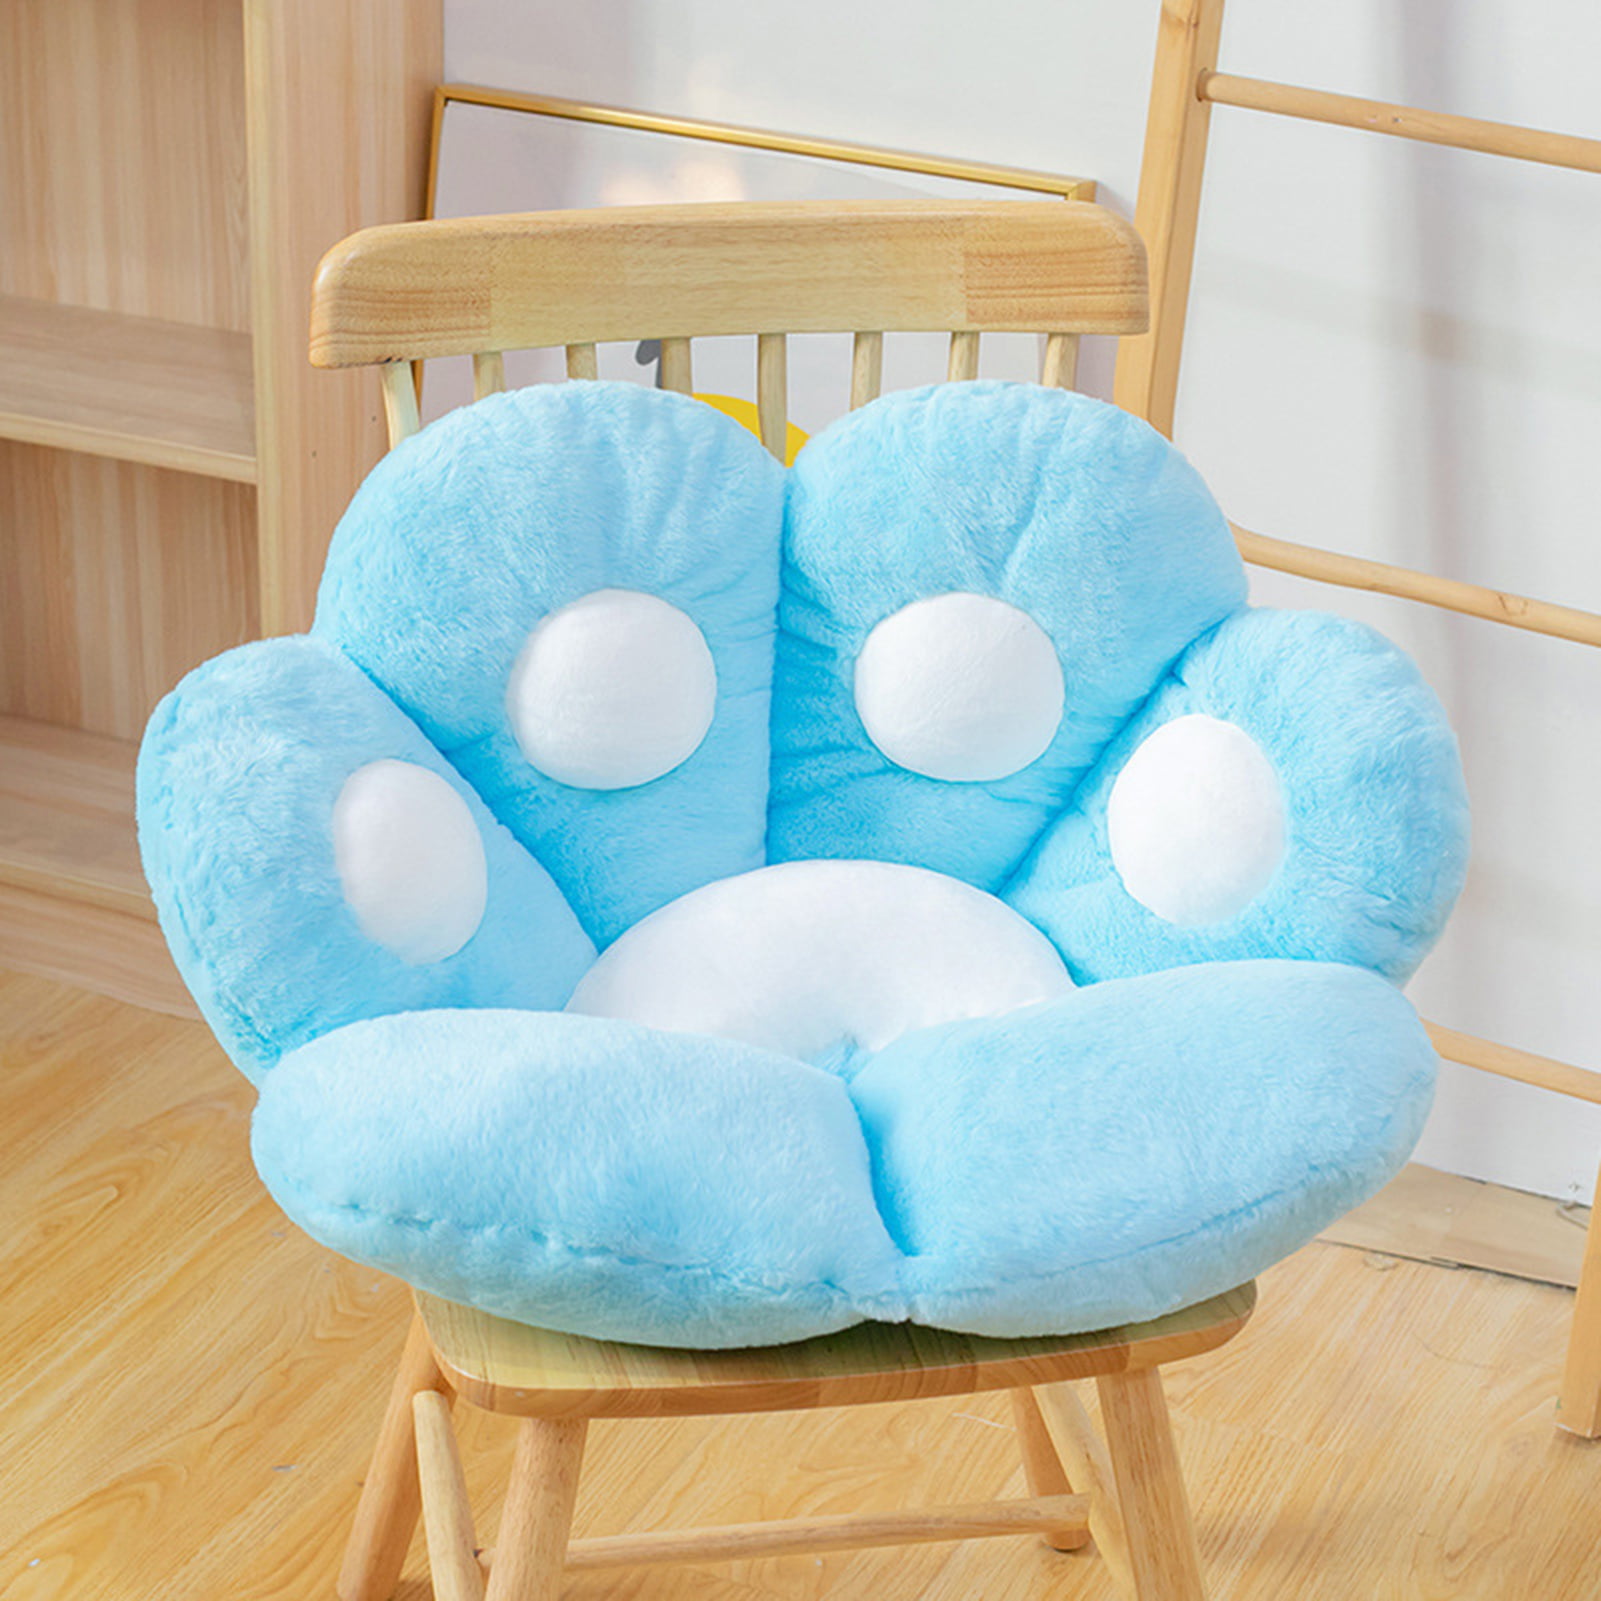 Blue Cat Paw Cushion Cute Seat Cushion Soft Comfortable Lazy Sofa Office Cat Paw Shape Seat Cushion for Home Bedroom Shop Restaurant Decoration 